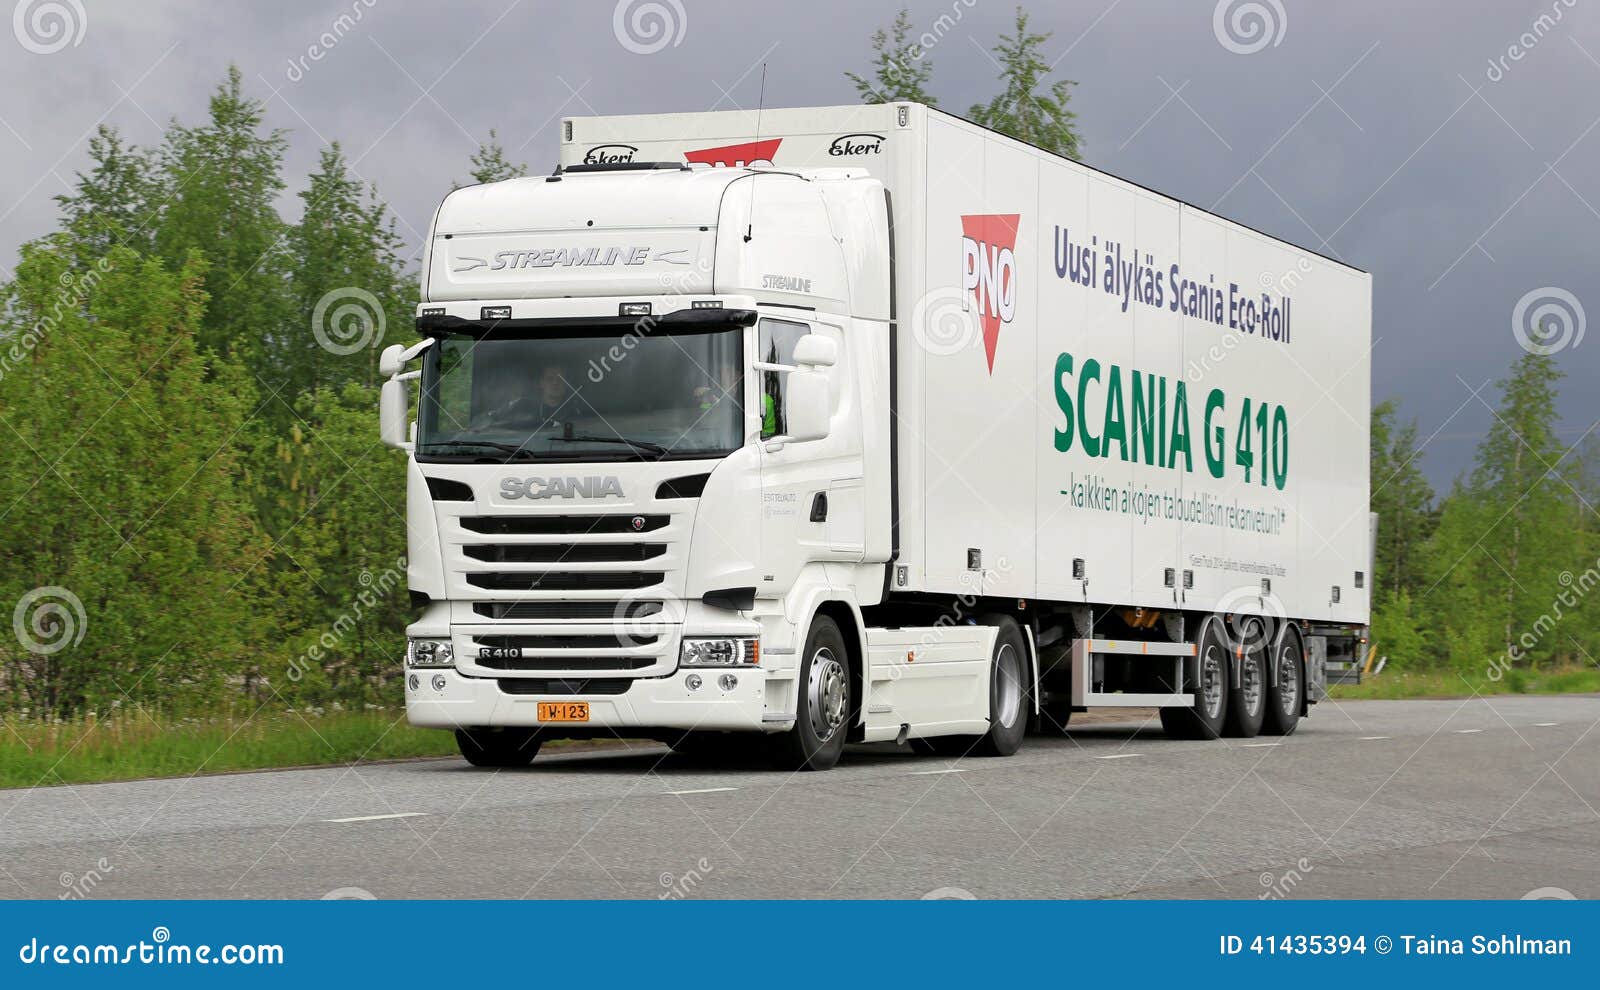 Scania R410 Euro 6 V8 Semi Truck On The Road Editorial Stock Image  Image: 41435394